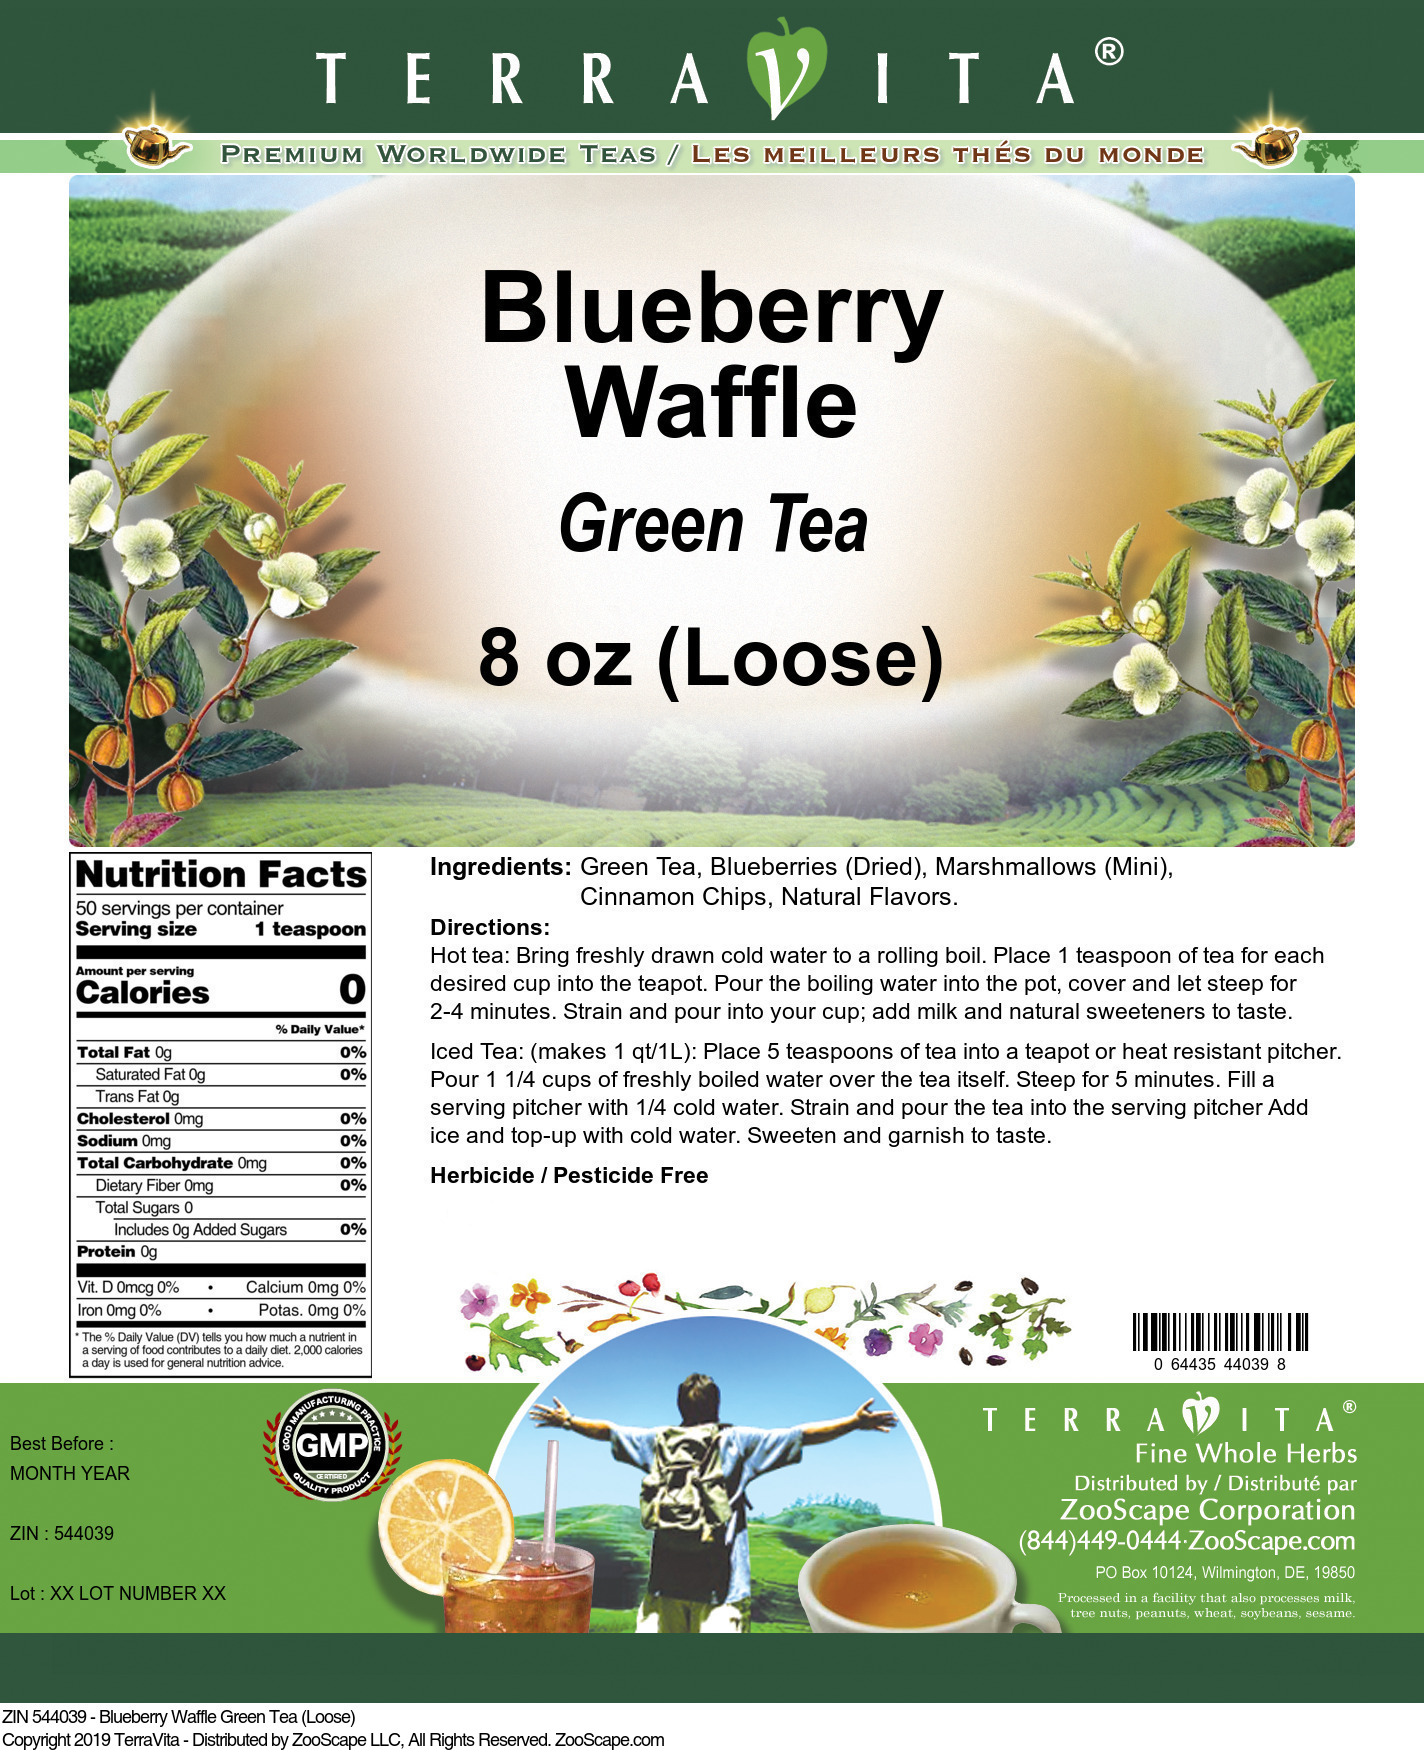 Blueberry Waffle Green Tea (Loose) - Label